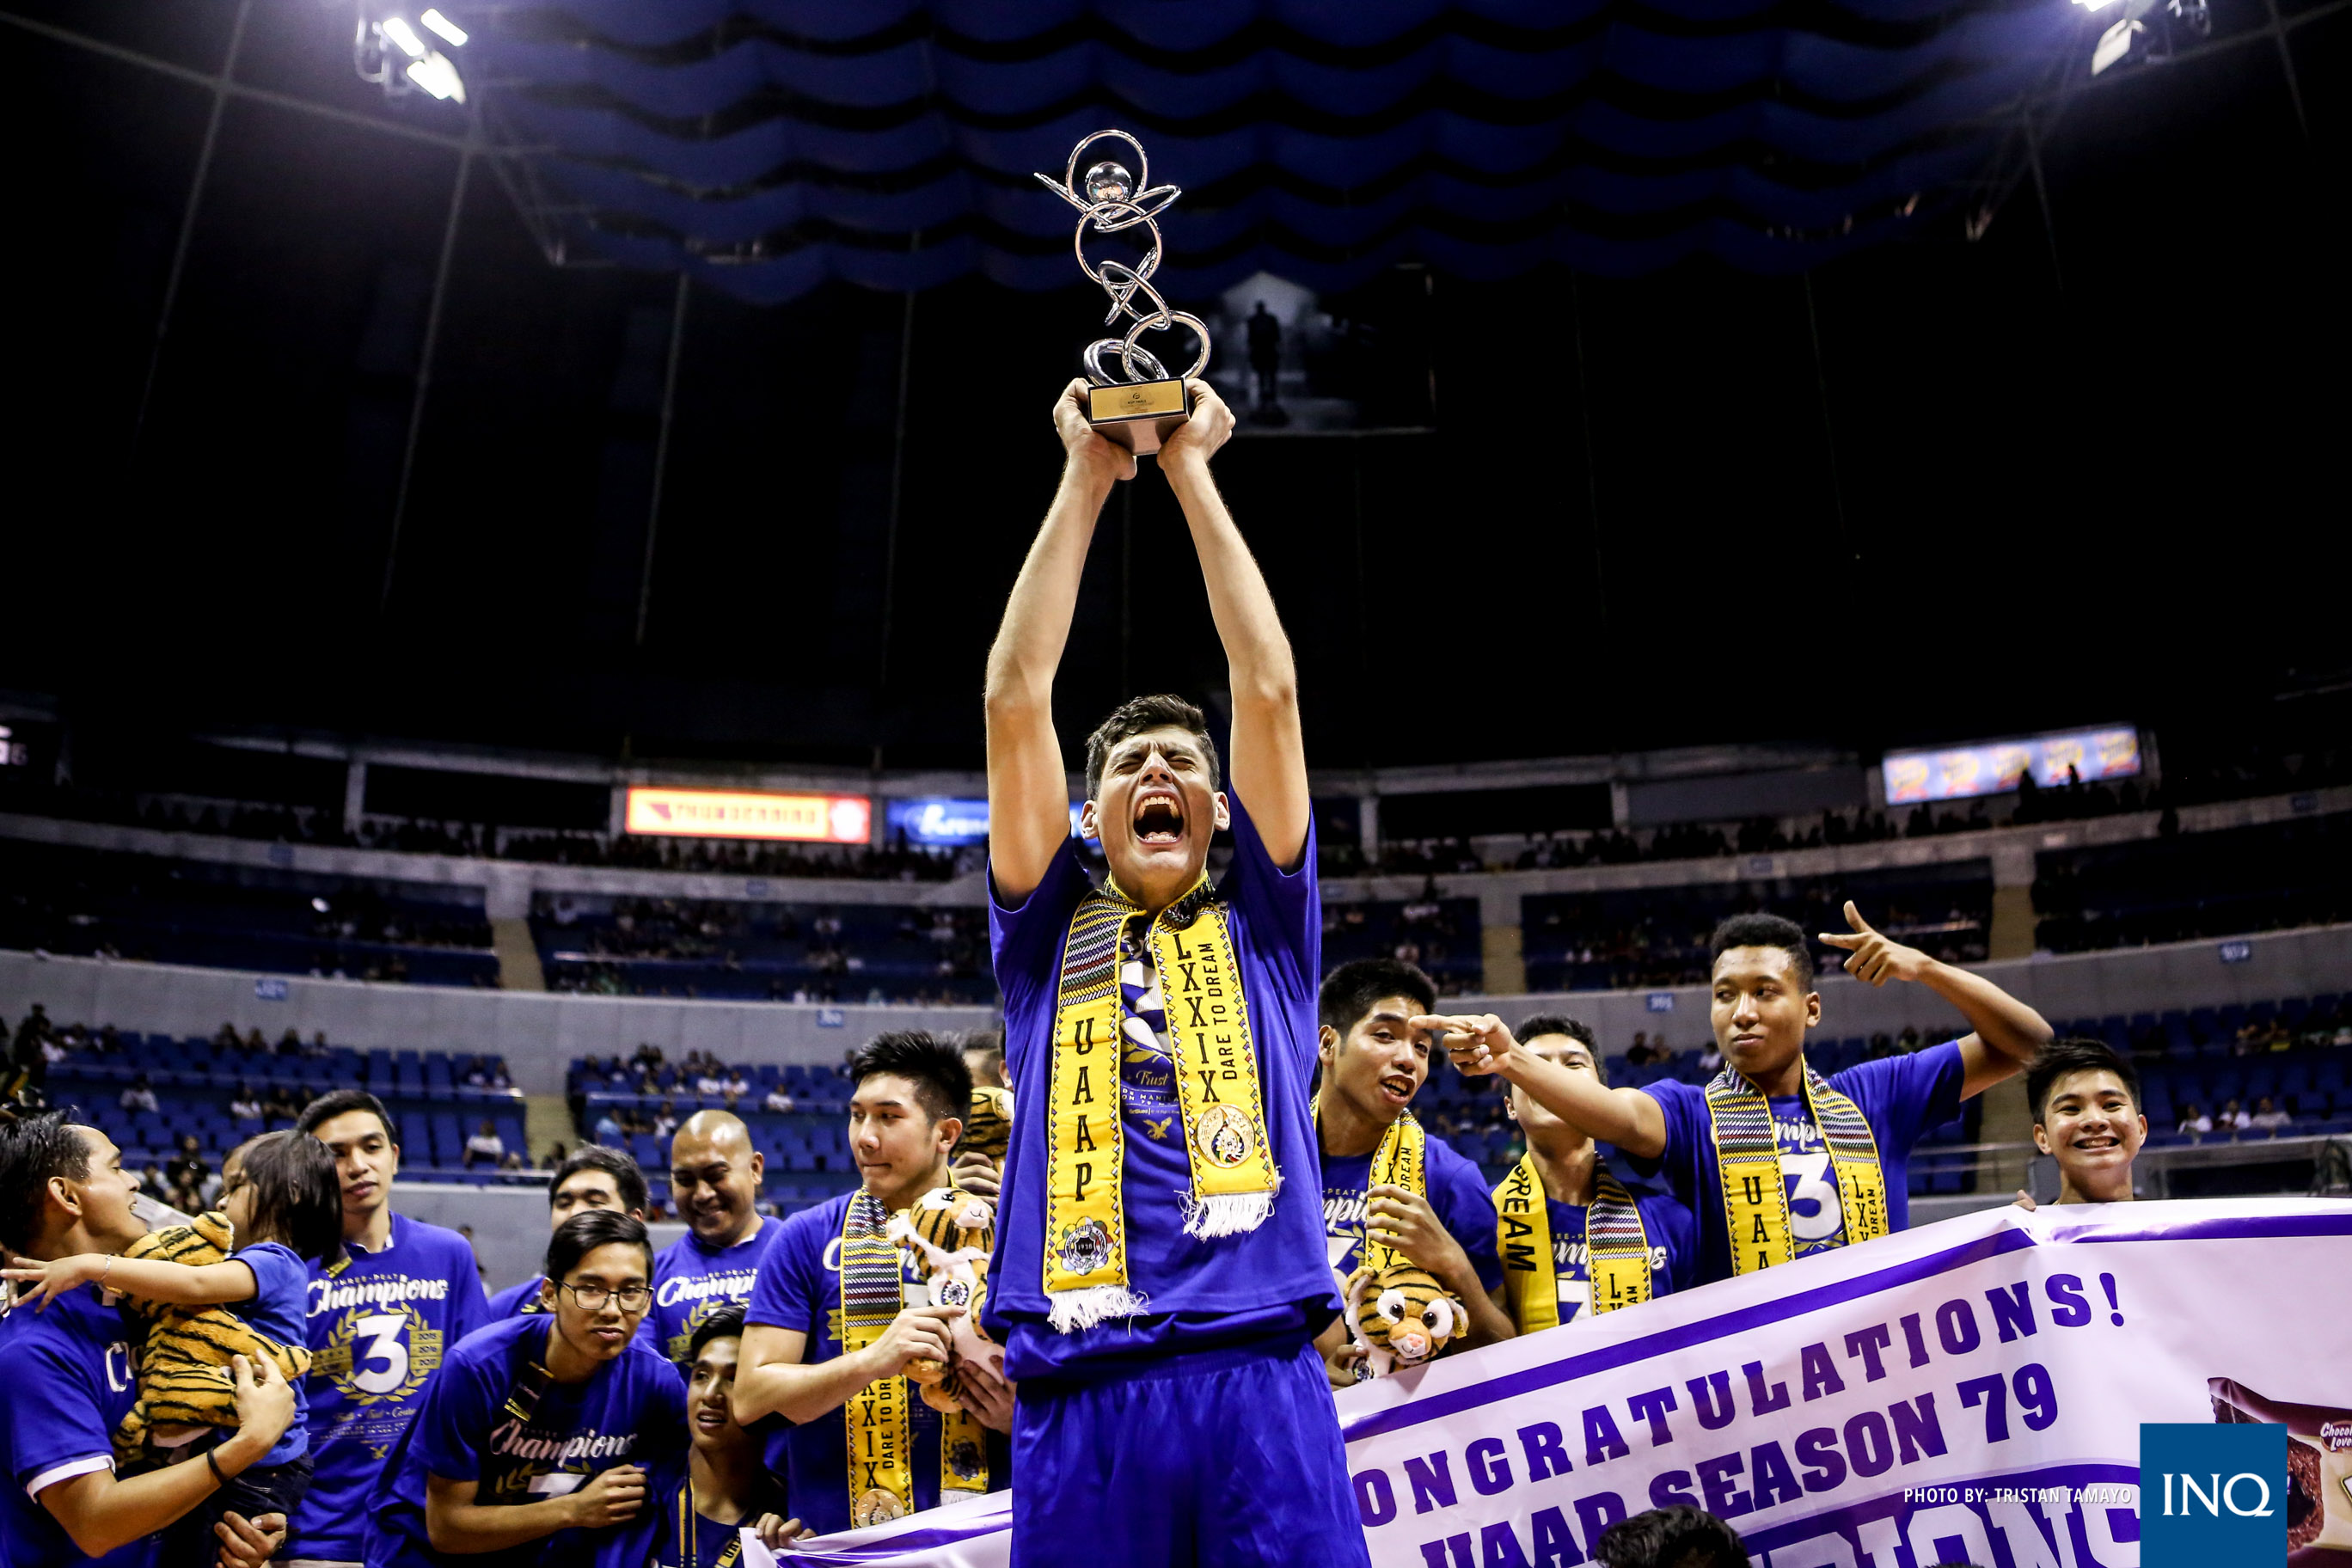 Tony Koyfman lifts his Finals MVP trophy after helping Ateneo beat National University to win the UAAP Season 79 men's volleyball Finals. Tristan Tamayo/INQUIRER.net